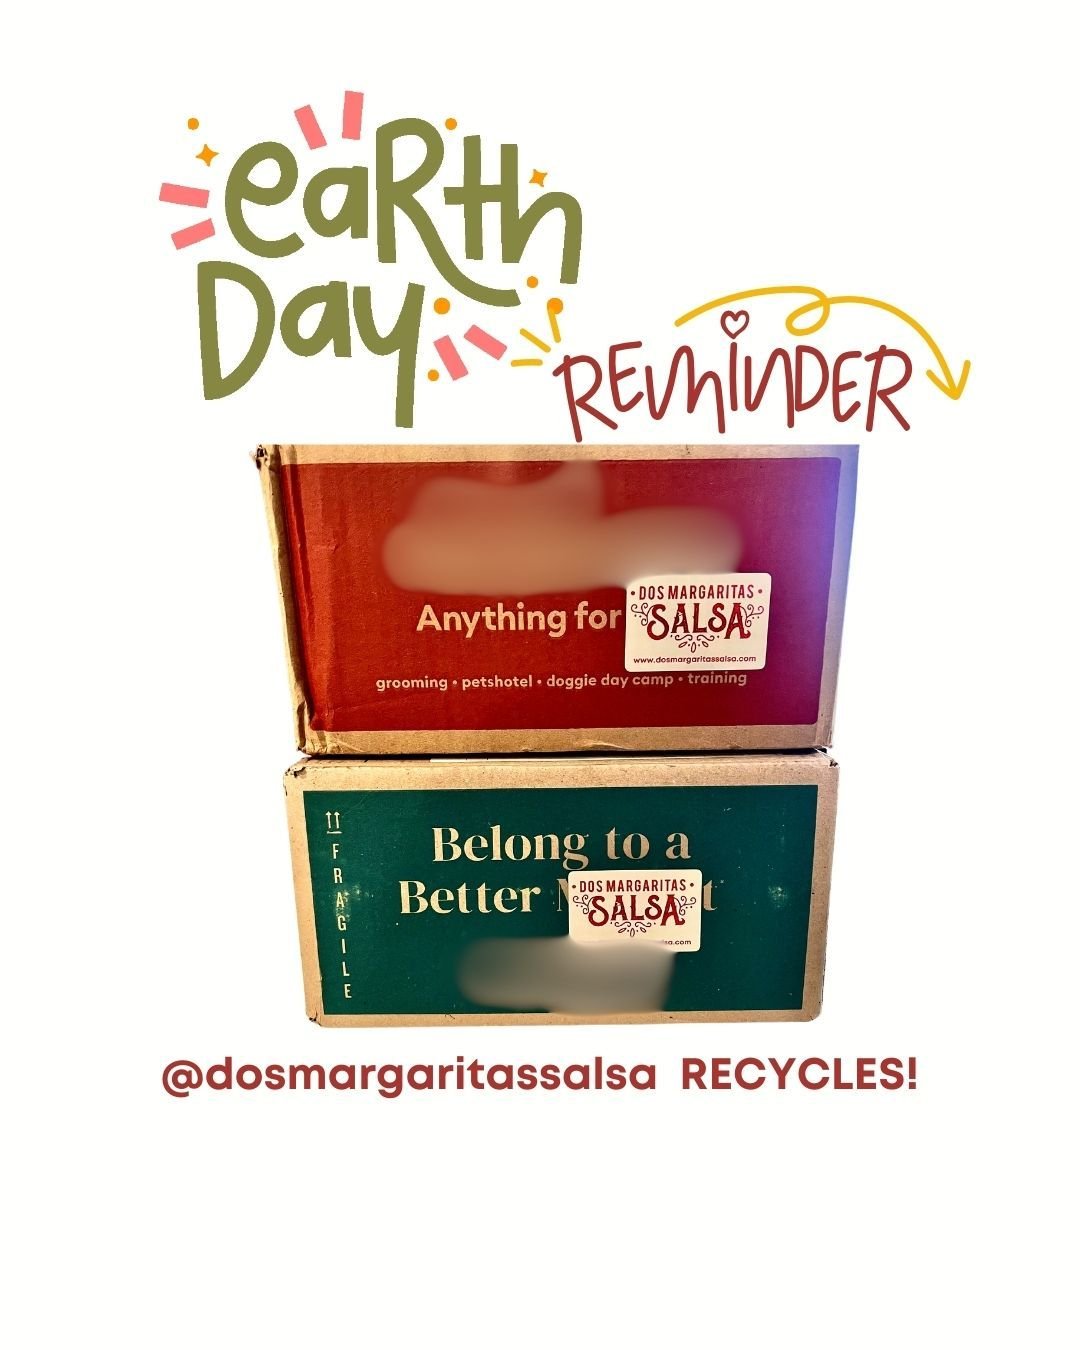 Box it up, y'all! 📦♻️ Did you know? We give our shipping boxes a second life to keep our costs low and show some love to our planet! Now that&rsquo;s an everyday celebration we can all get behind. 🌎 Let's keep the good vibes going by recycling toge